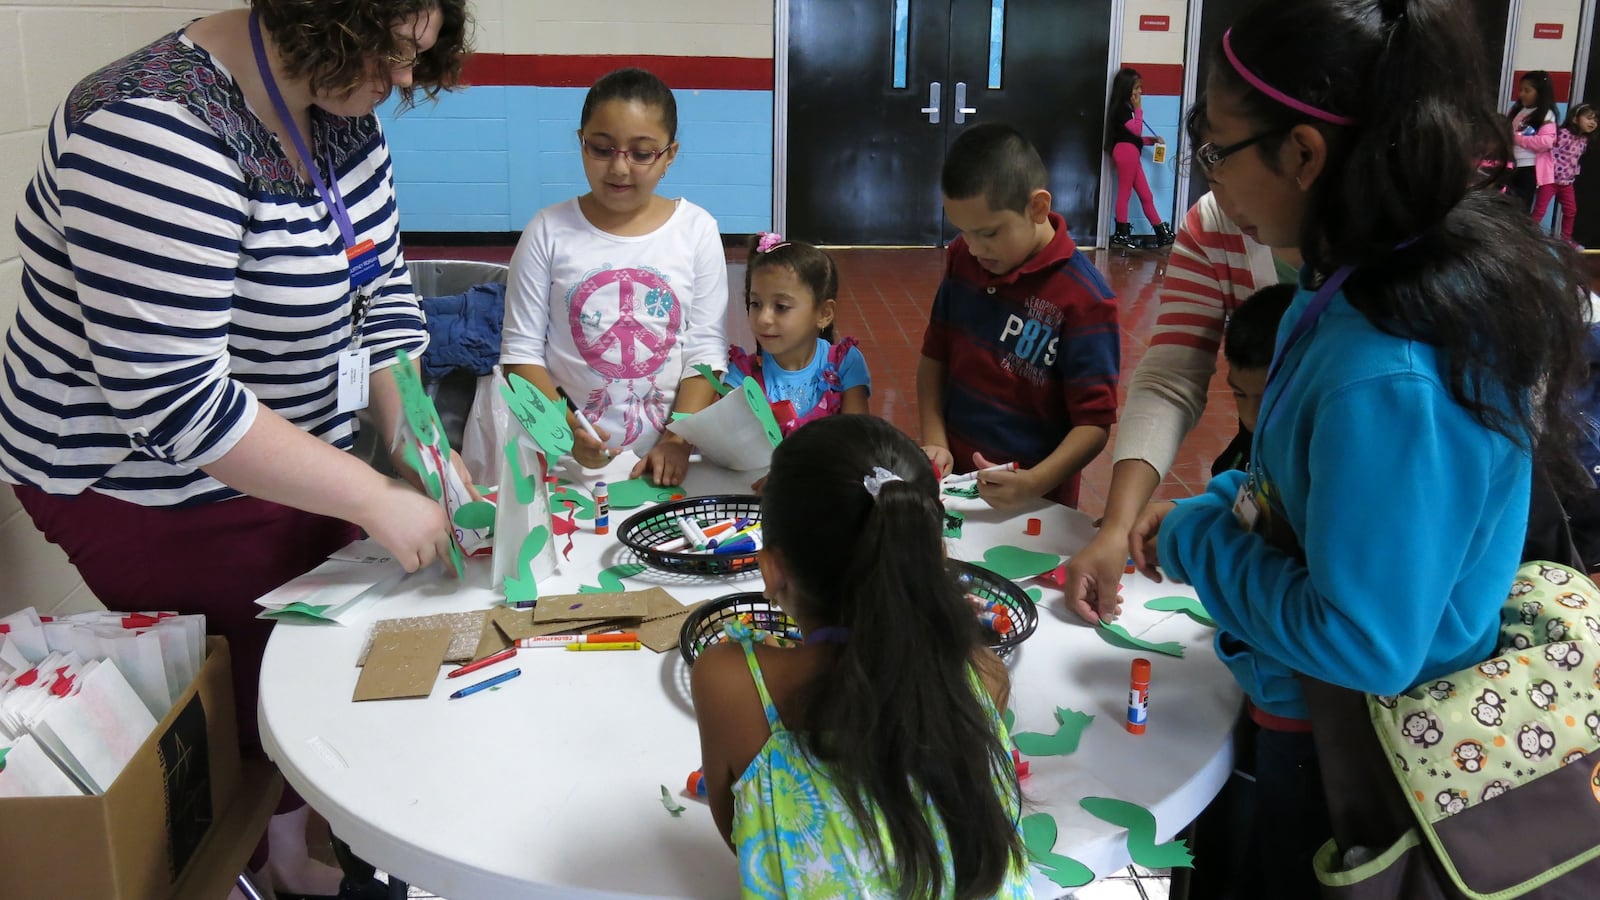 Students participate in a craft at a joint event between Metropolitan Nashville Public Schools and the Nashville Public Library to teach immigrant families about the public library system.